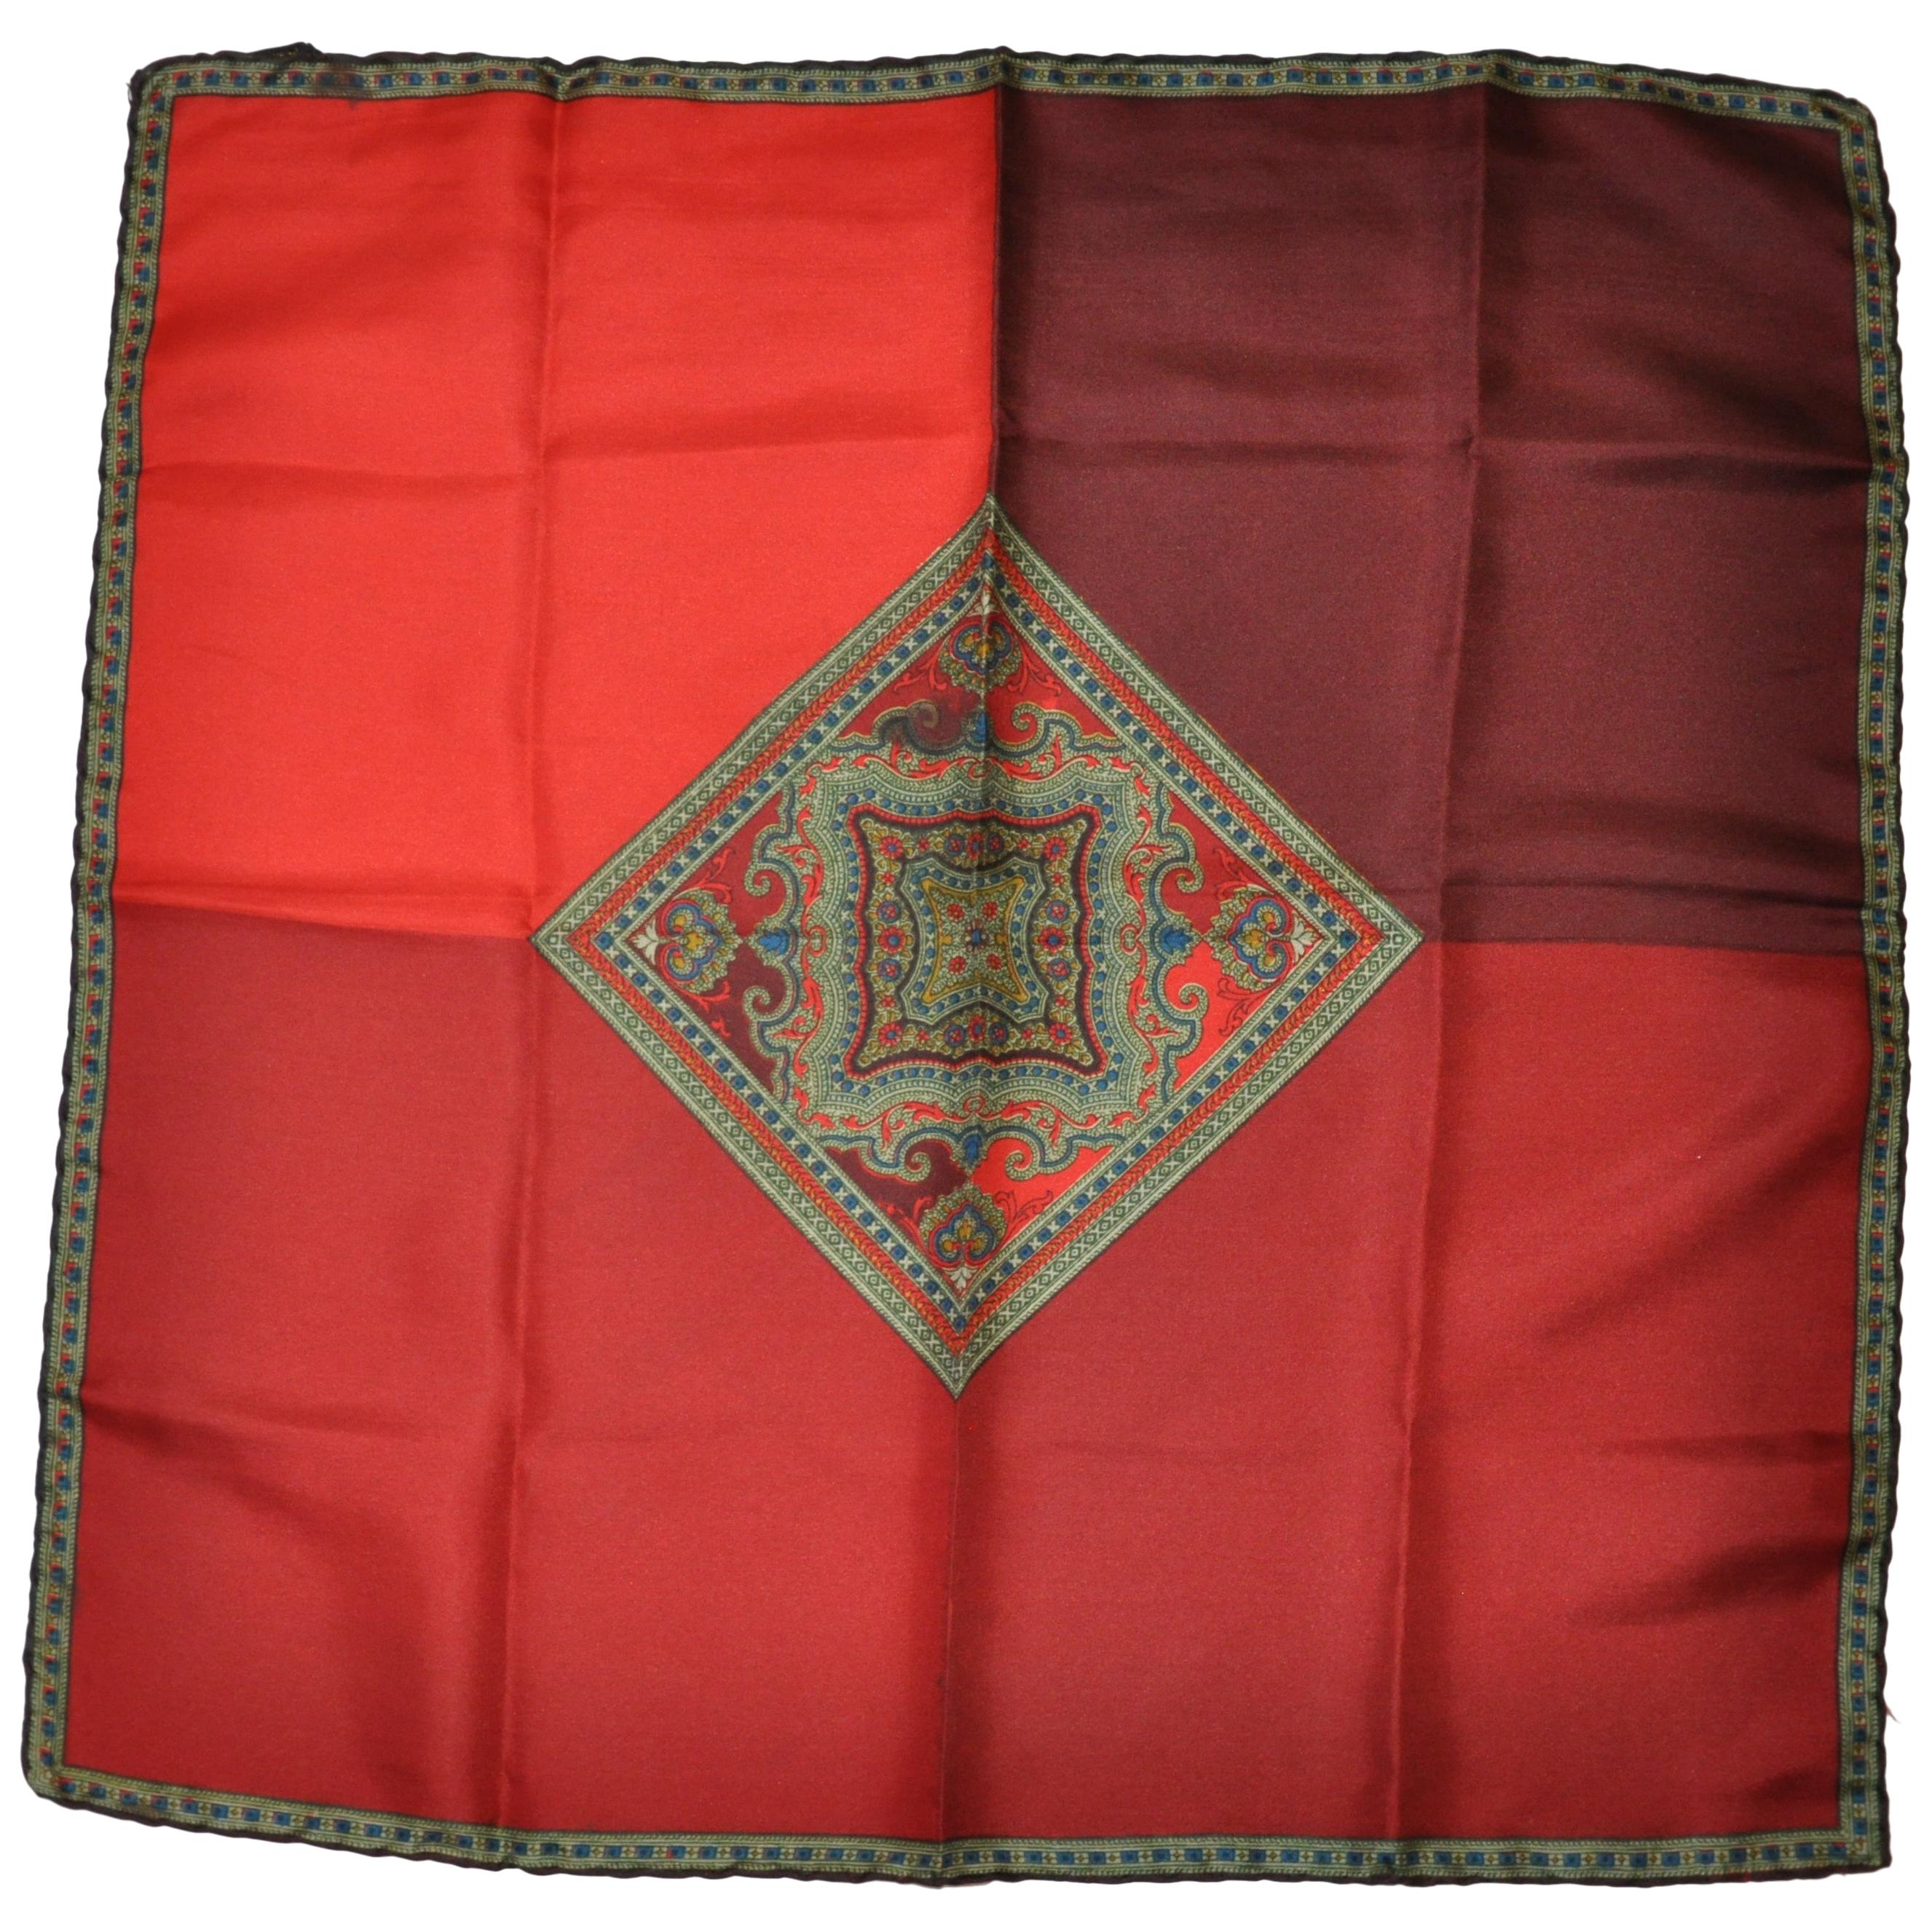 Ashear Elegant Warm Hues of Red with "Imperial" Center Silk Handkerchief For Sale